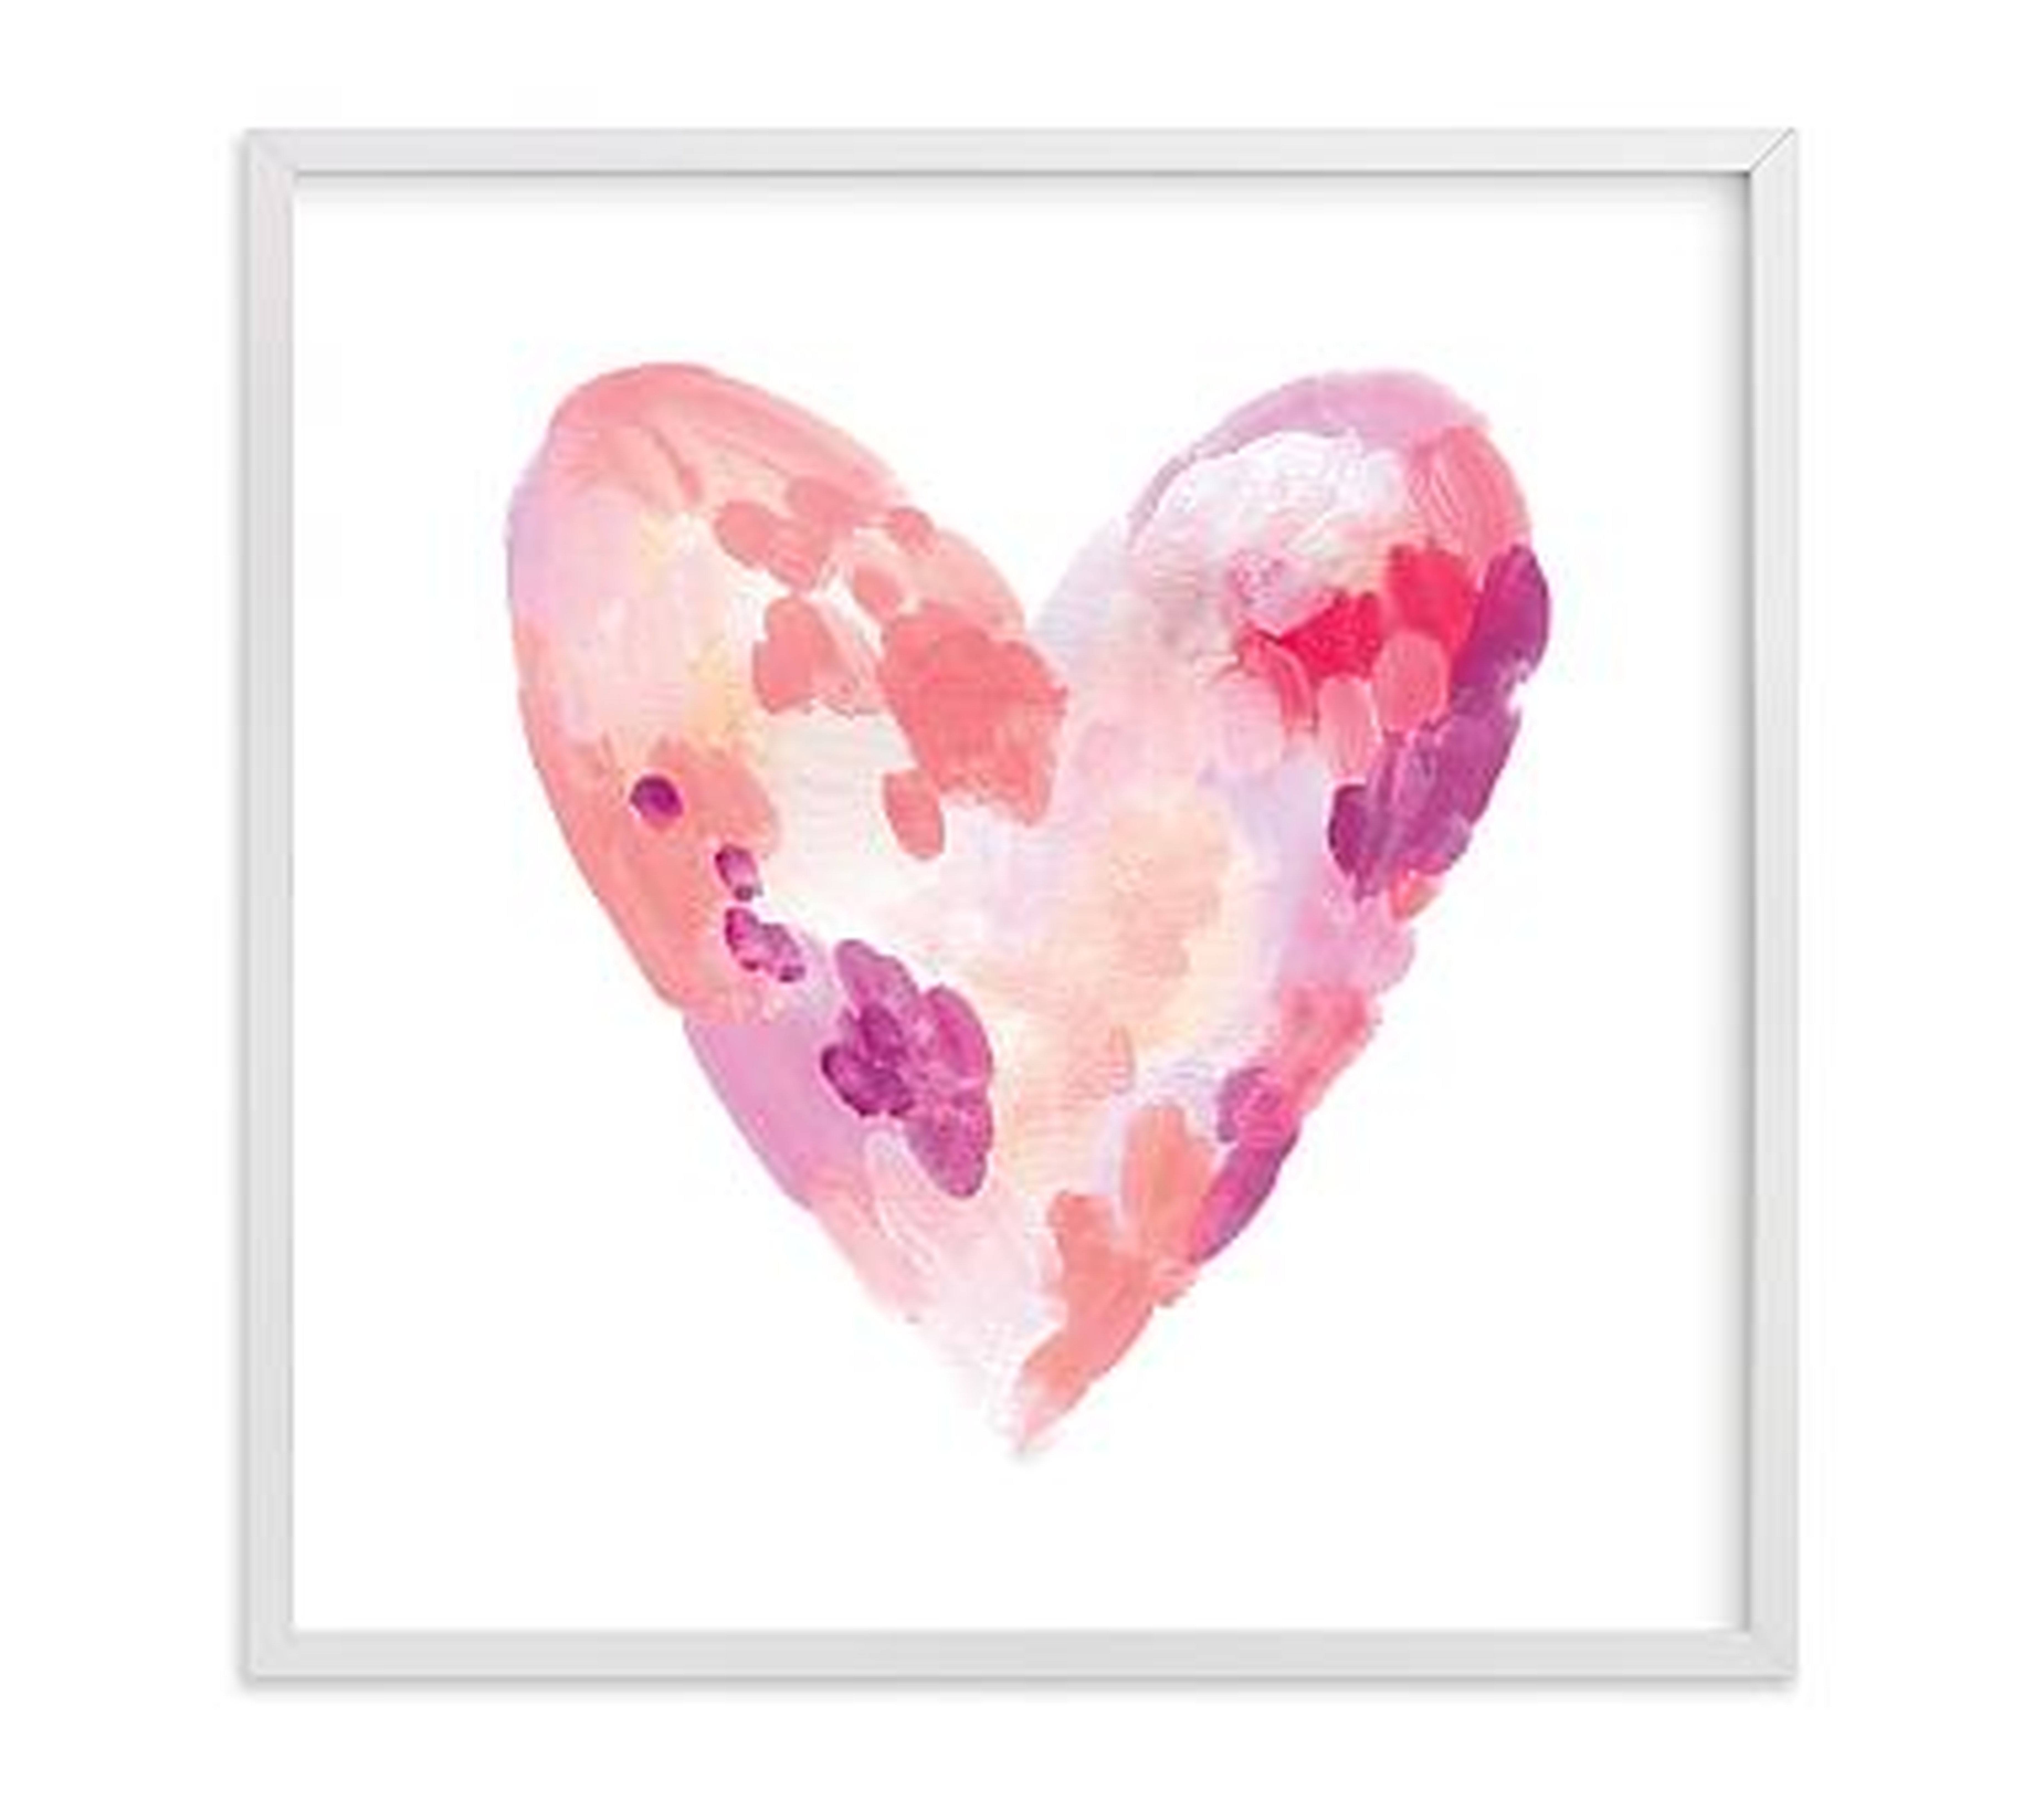 Abstract Heart Wall Art By Minted(R),16x16, White - Pottery Barn Kids